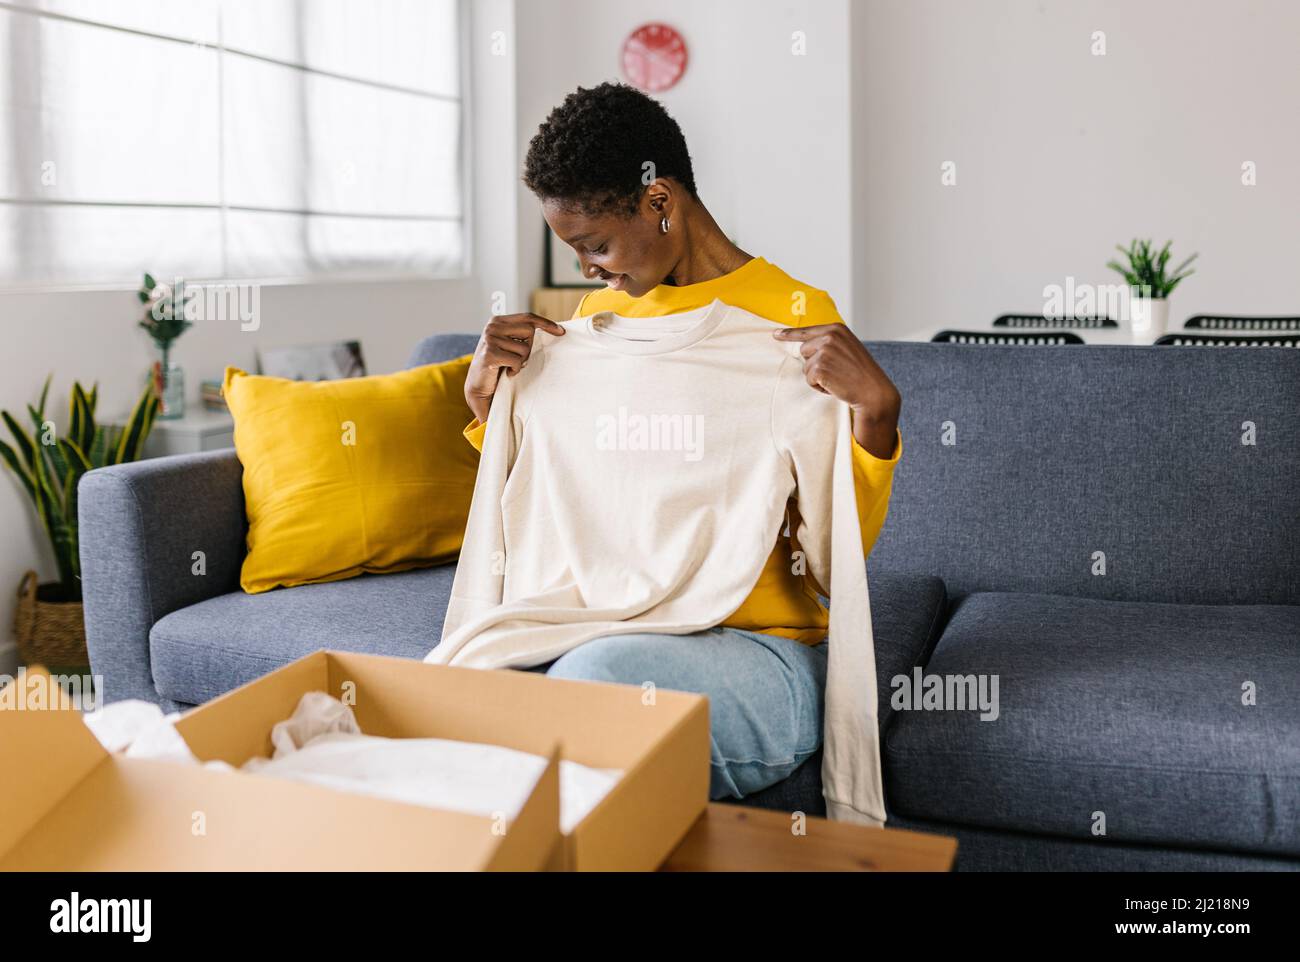 Woman opening a parcel box with a clothing item from an online purchase. Stock Photo